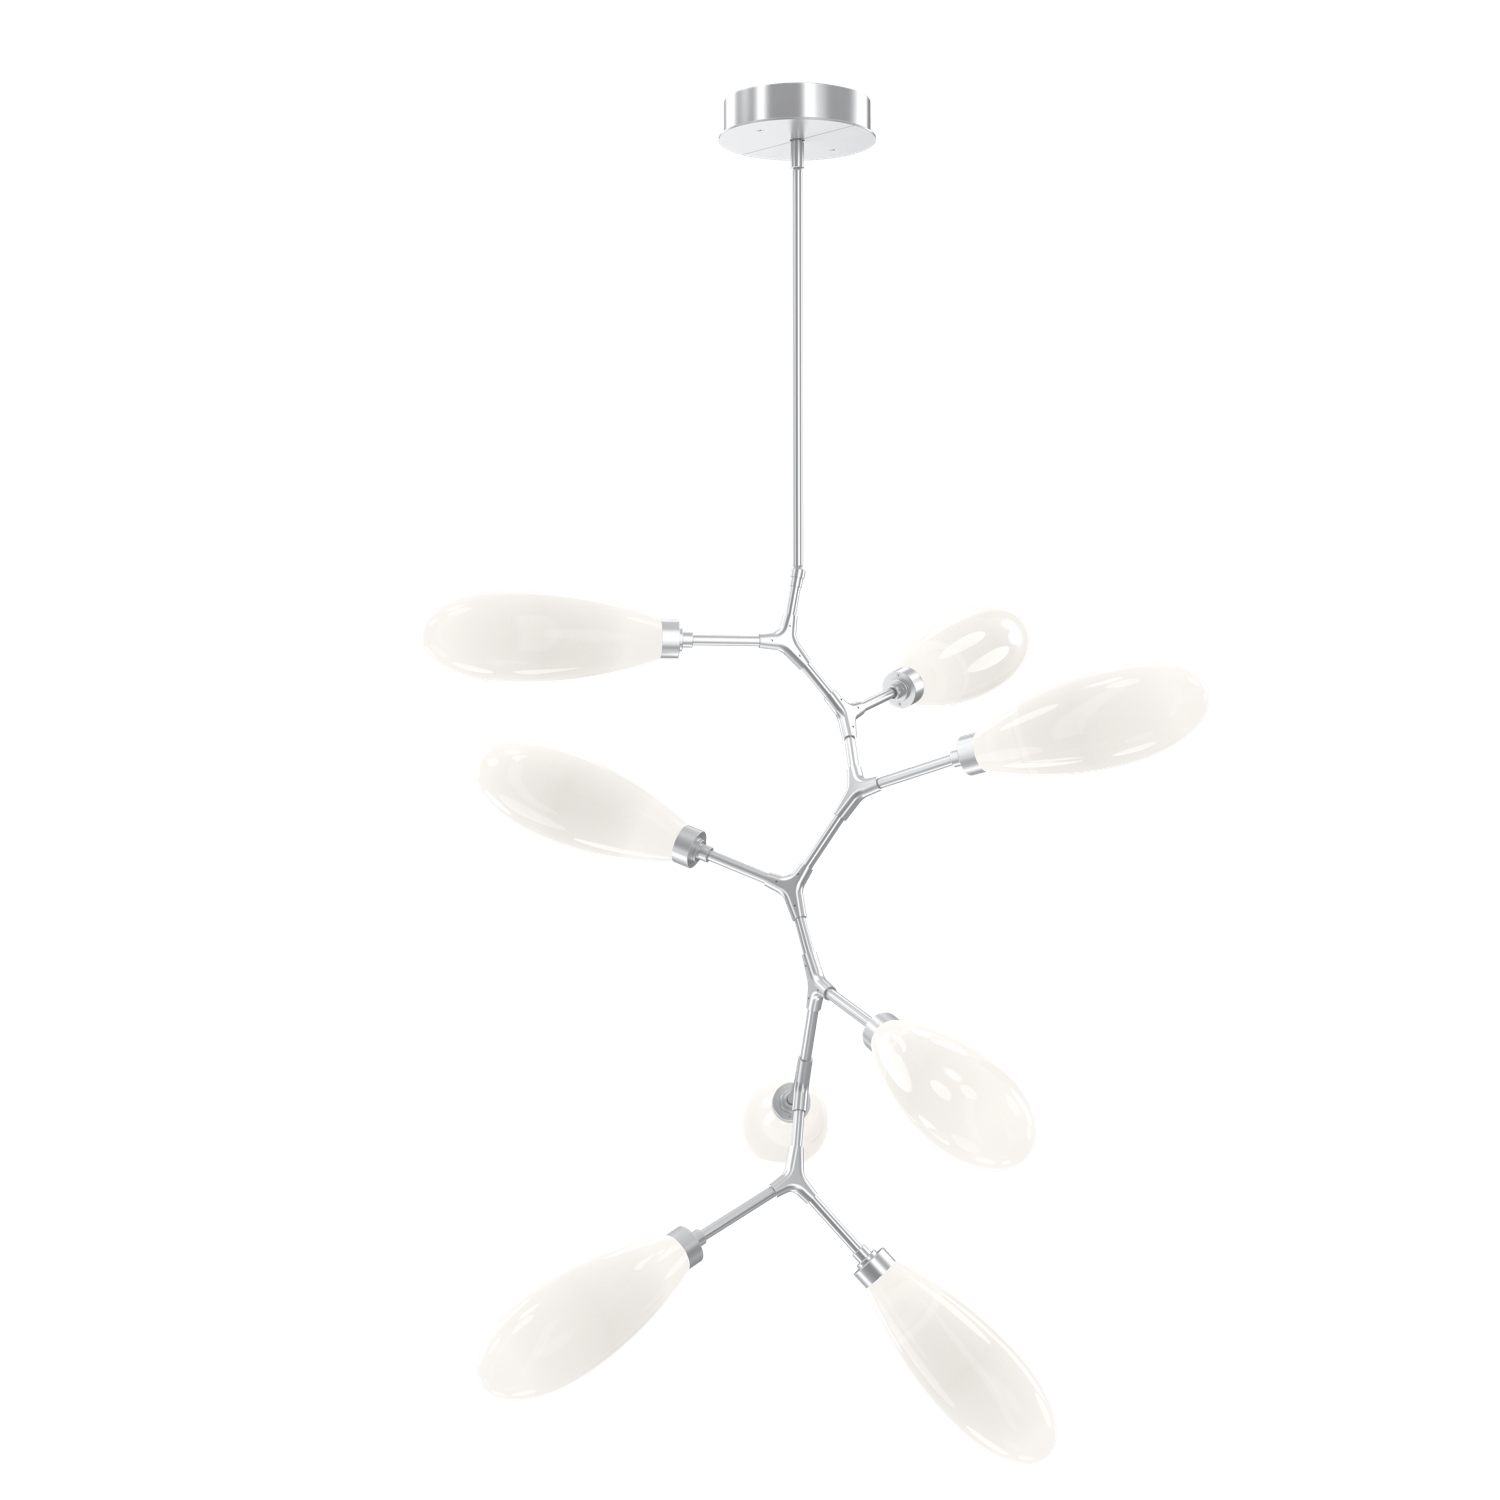 CHB0071-VB-CS-WL-LL-Hammerton-Studio-Fiori-8-light-organic-vine-chandelier-with-classic-silver-finish-and-opal-white-glass-shades-and-LED-lamping